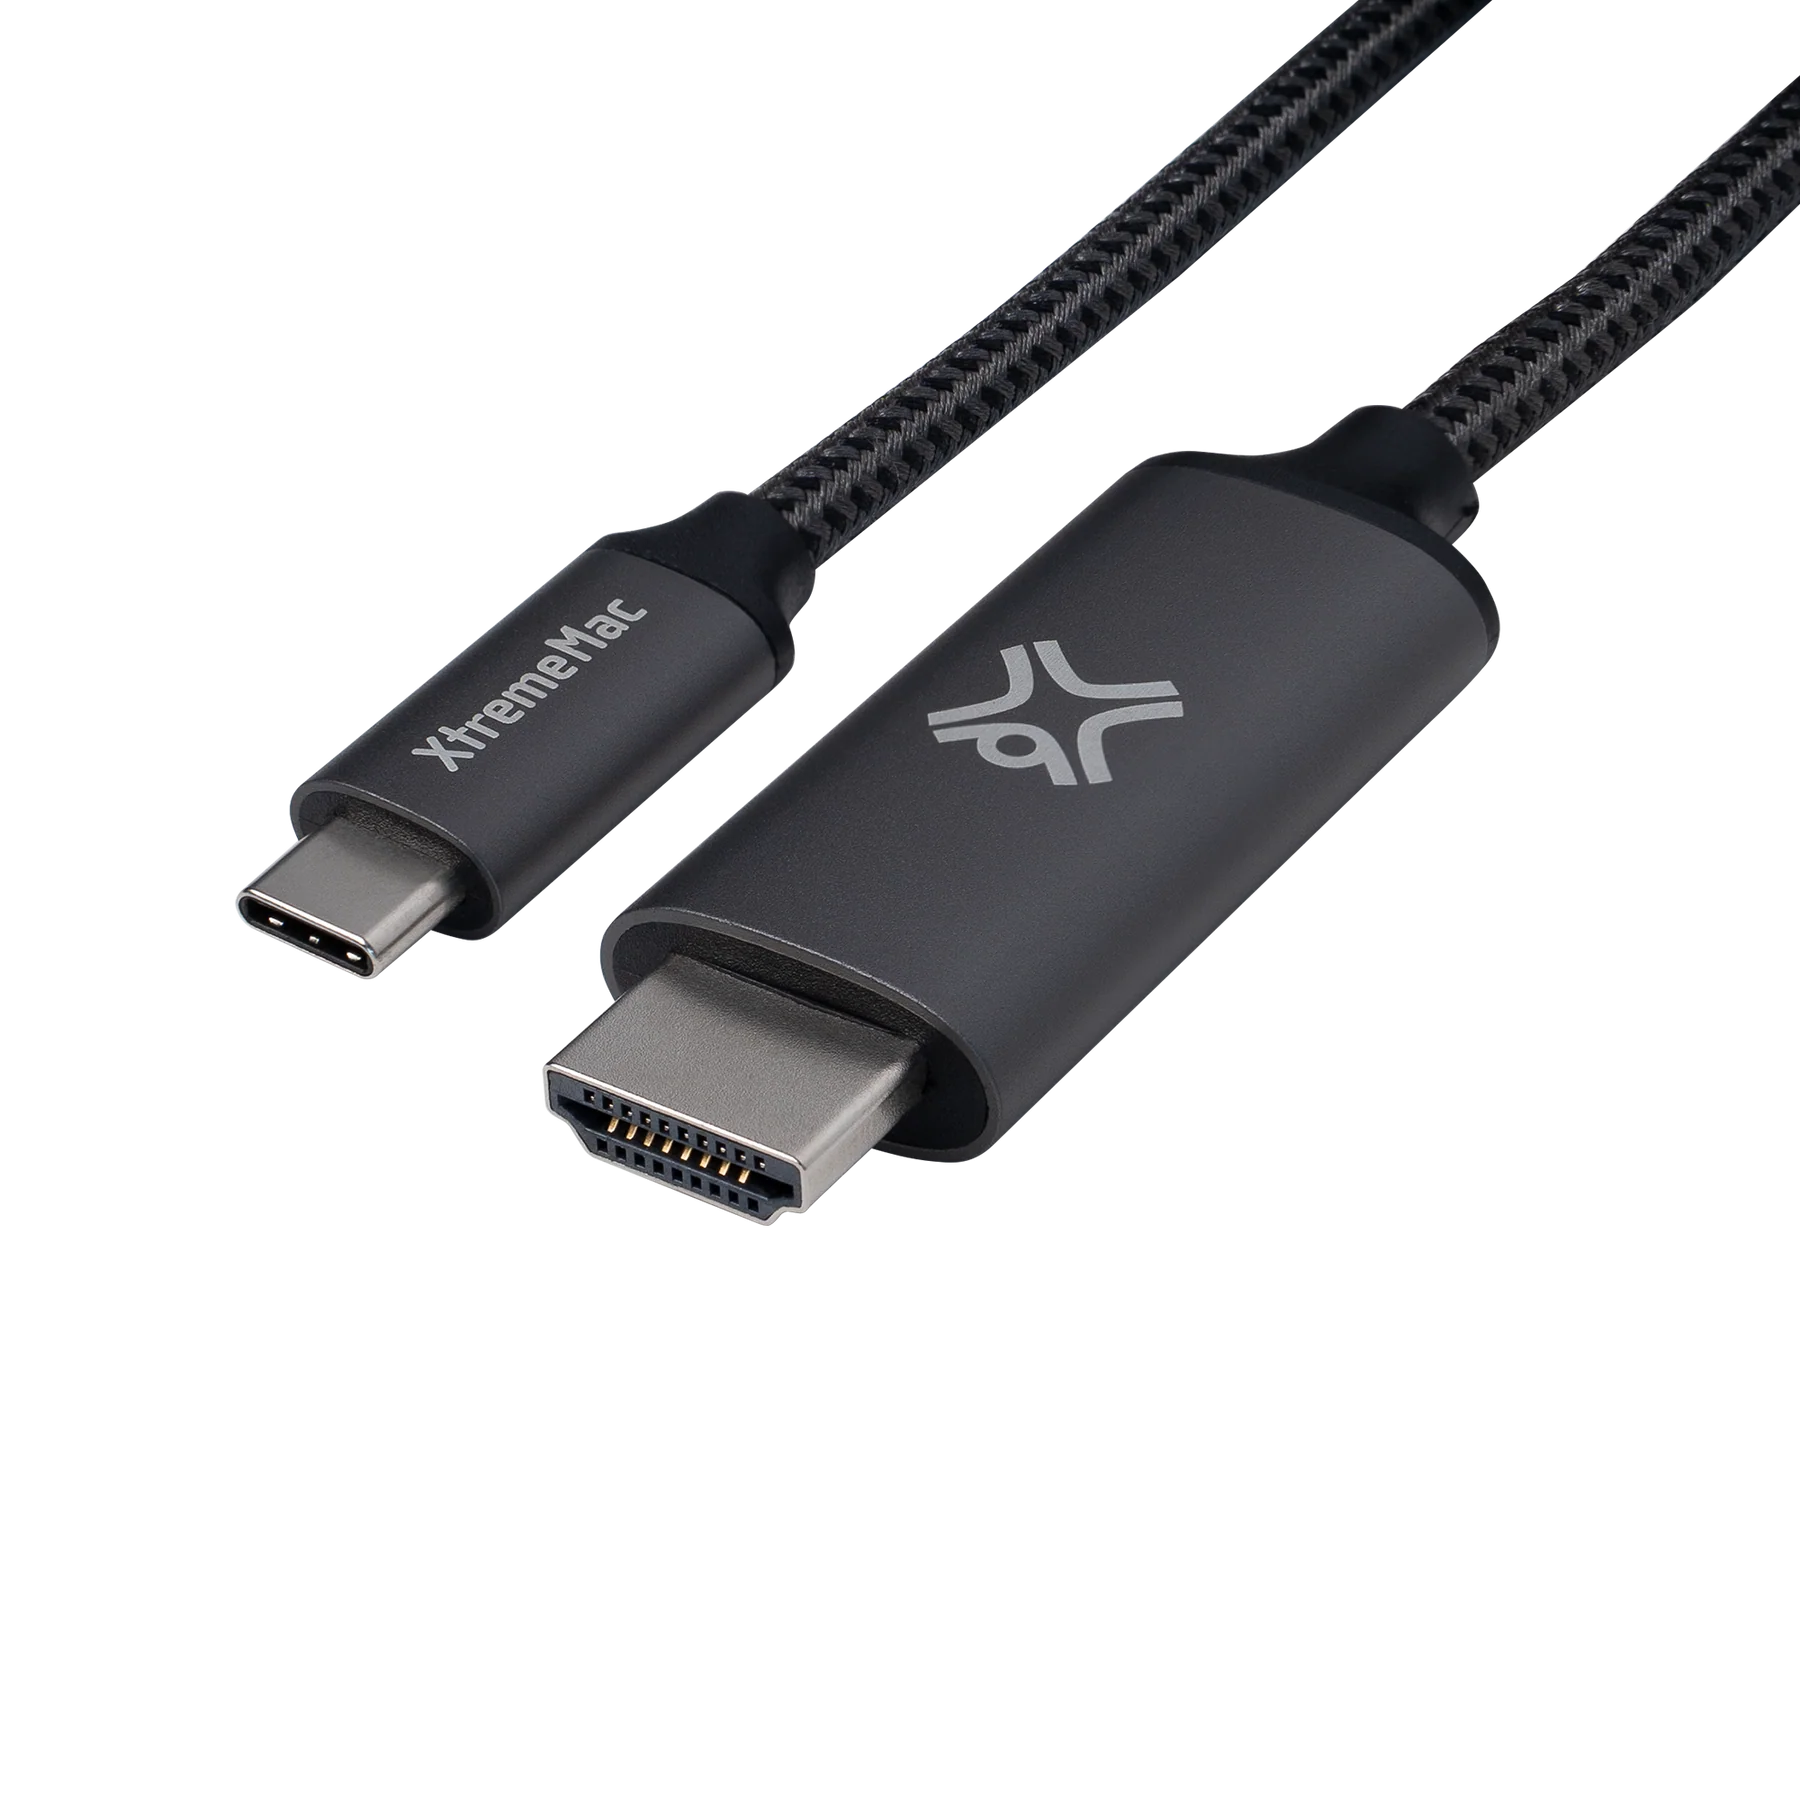 Xtrememac Type-C To HDMI Nylon Braided Cable 2M - Space Grey